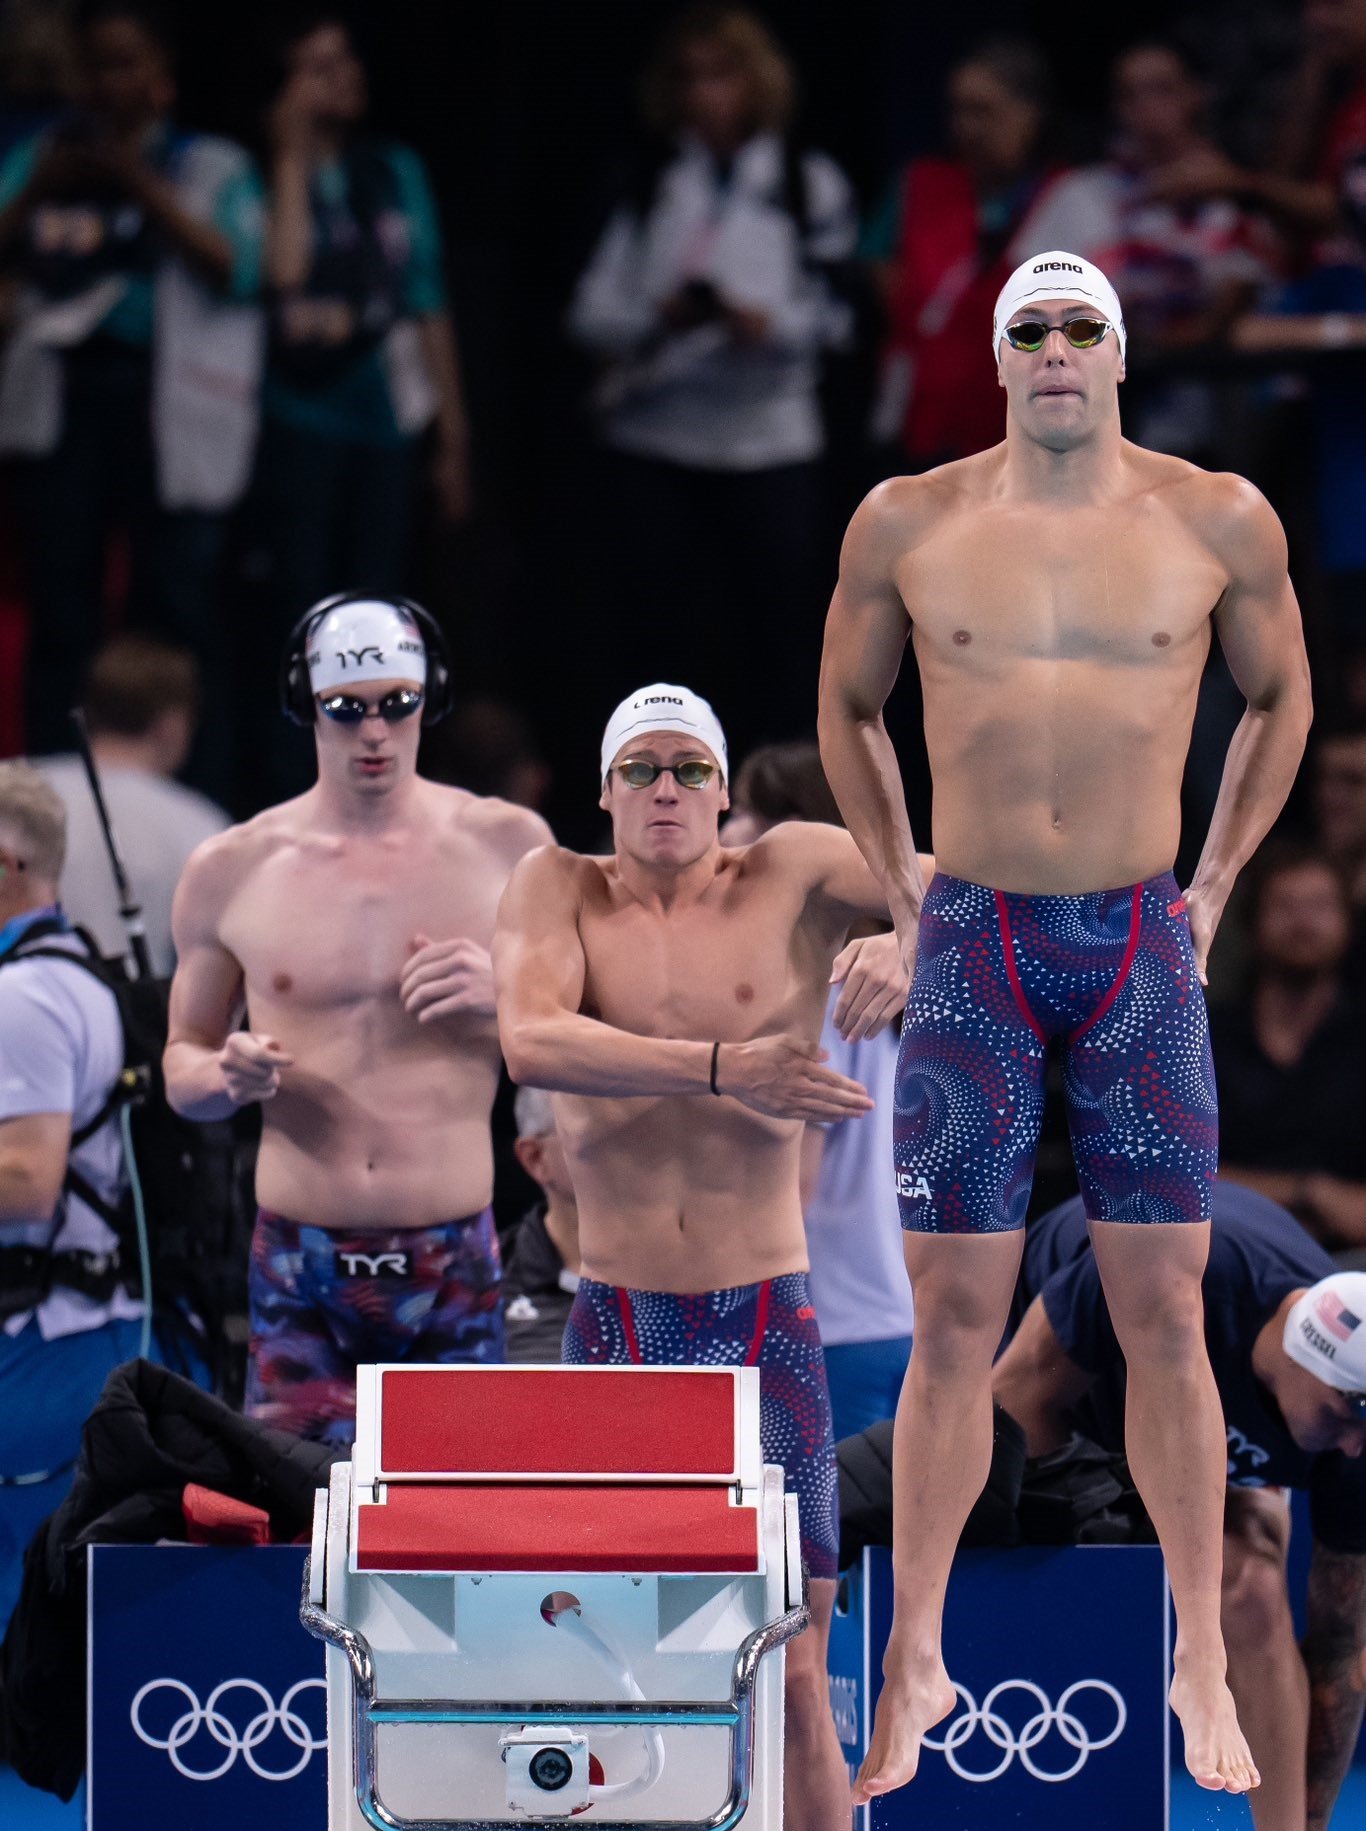 USA wins gold in men’s 4x100M freestyle relay final 6